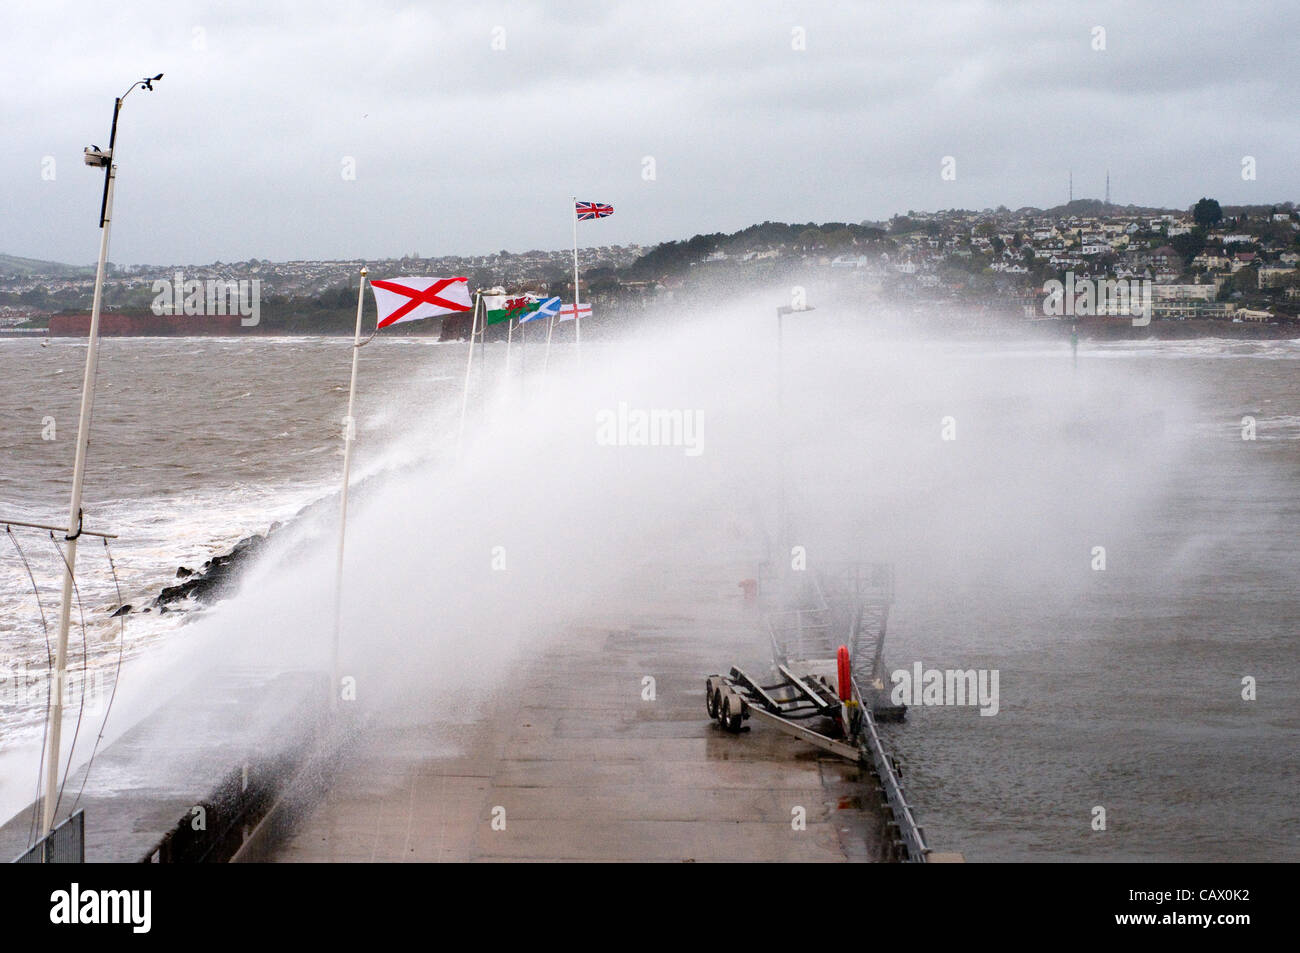 Torquay, UK. 30 April, 2012. High waves crash over the sea wall at Torquay, Devon, as storms and rain hit the South Coast of the UK.England* Stock Photo